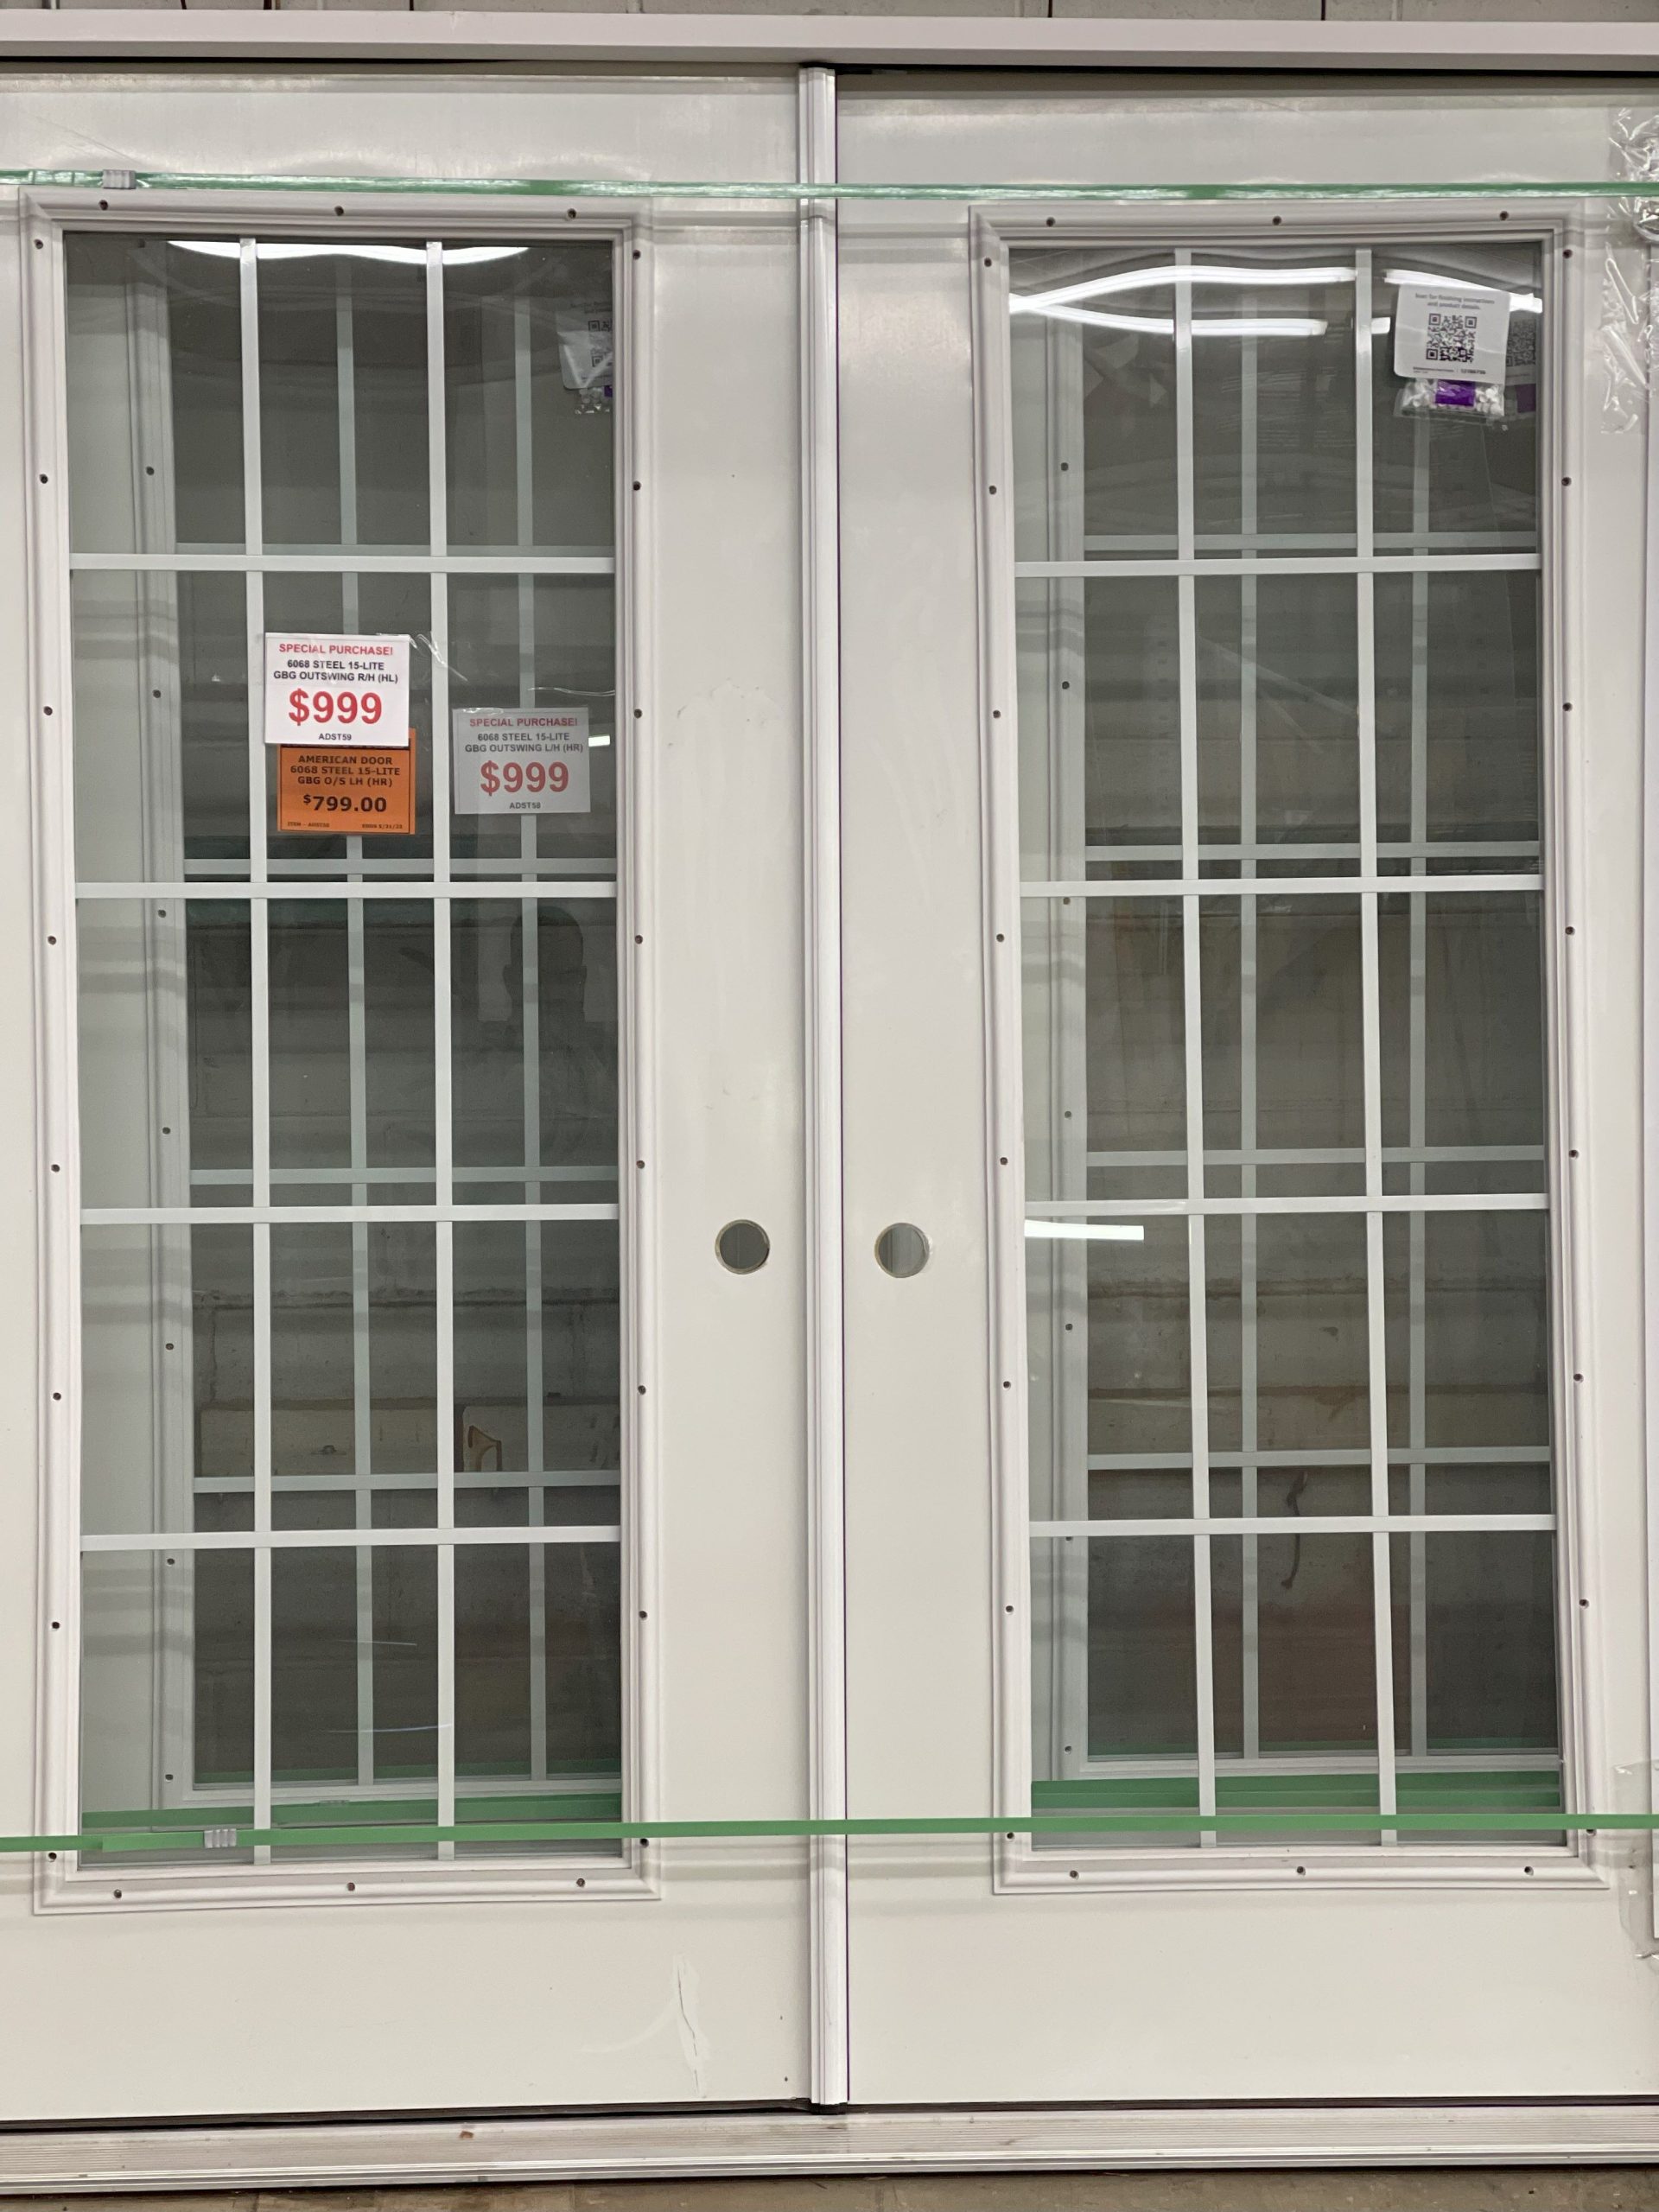 6/0 x 6/8 Steel Exterior Door 15-Lite Grills-Between-Glass Outswing Unit Available in Left and Right Hand-image